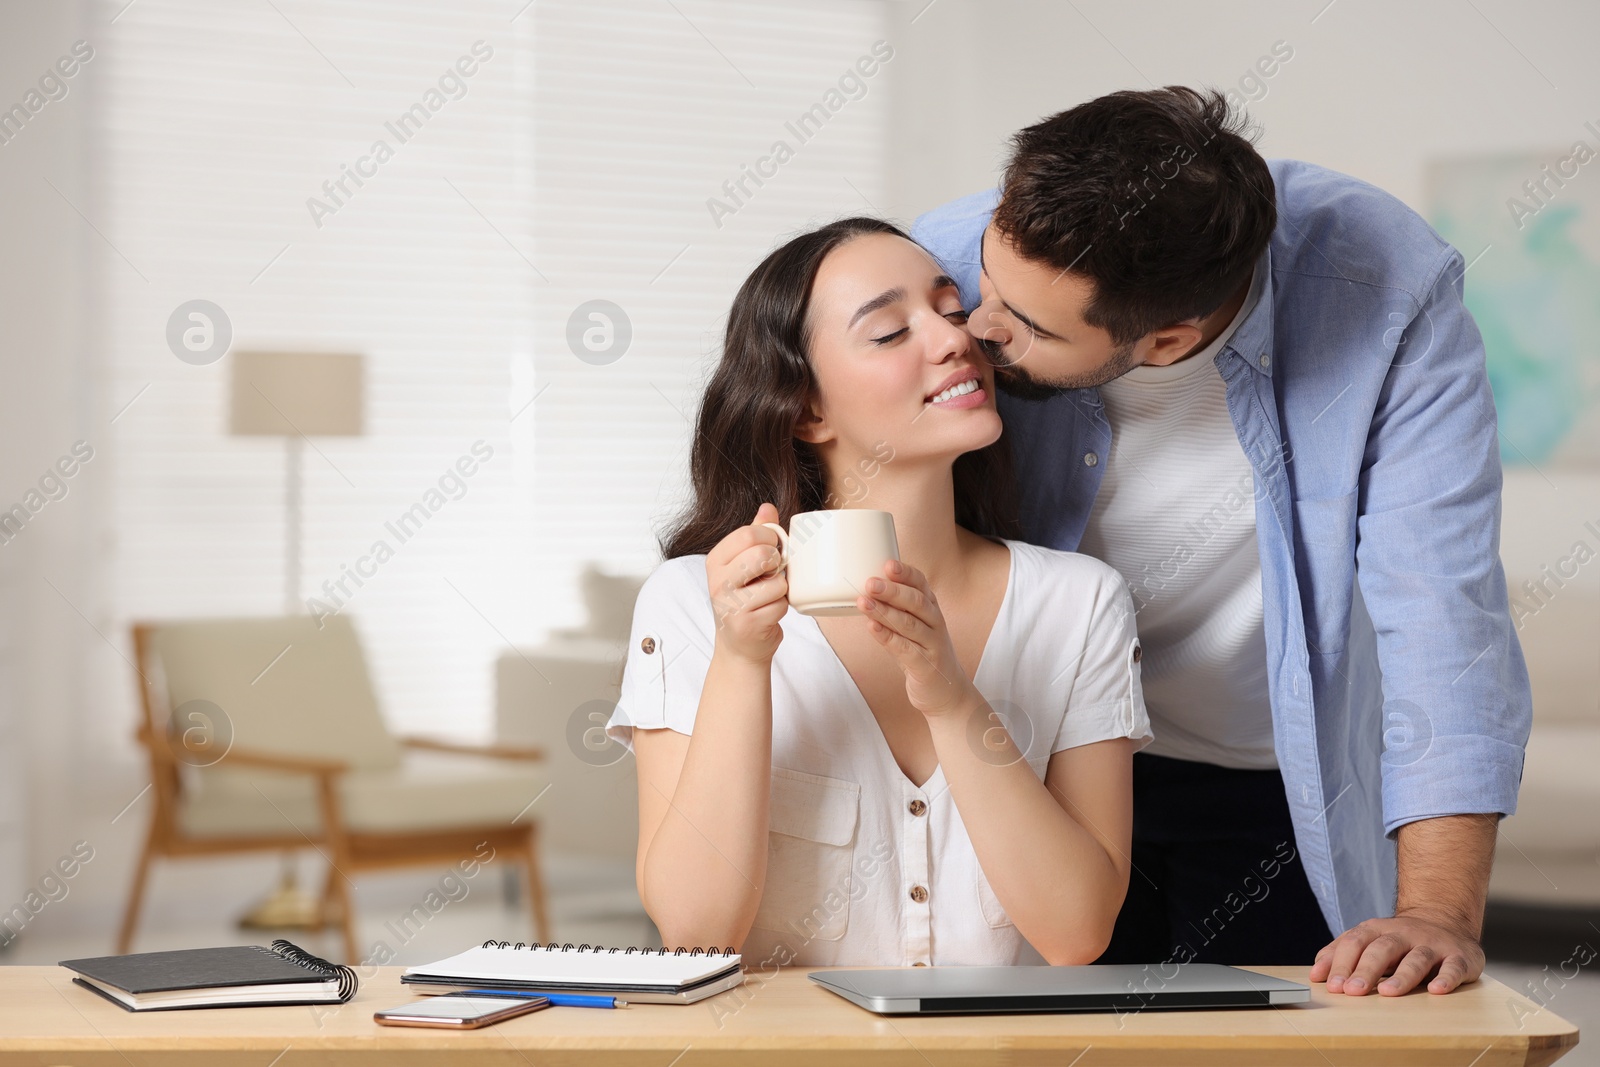 Photo of Cute couple. Man kissing his girlfriend at home, space for text